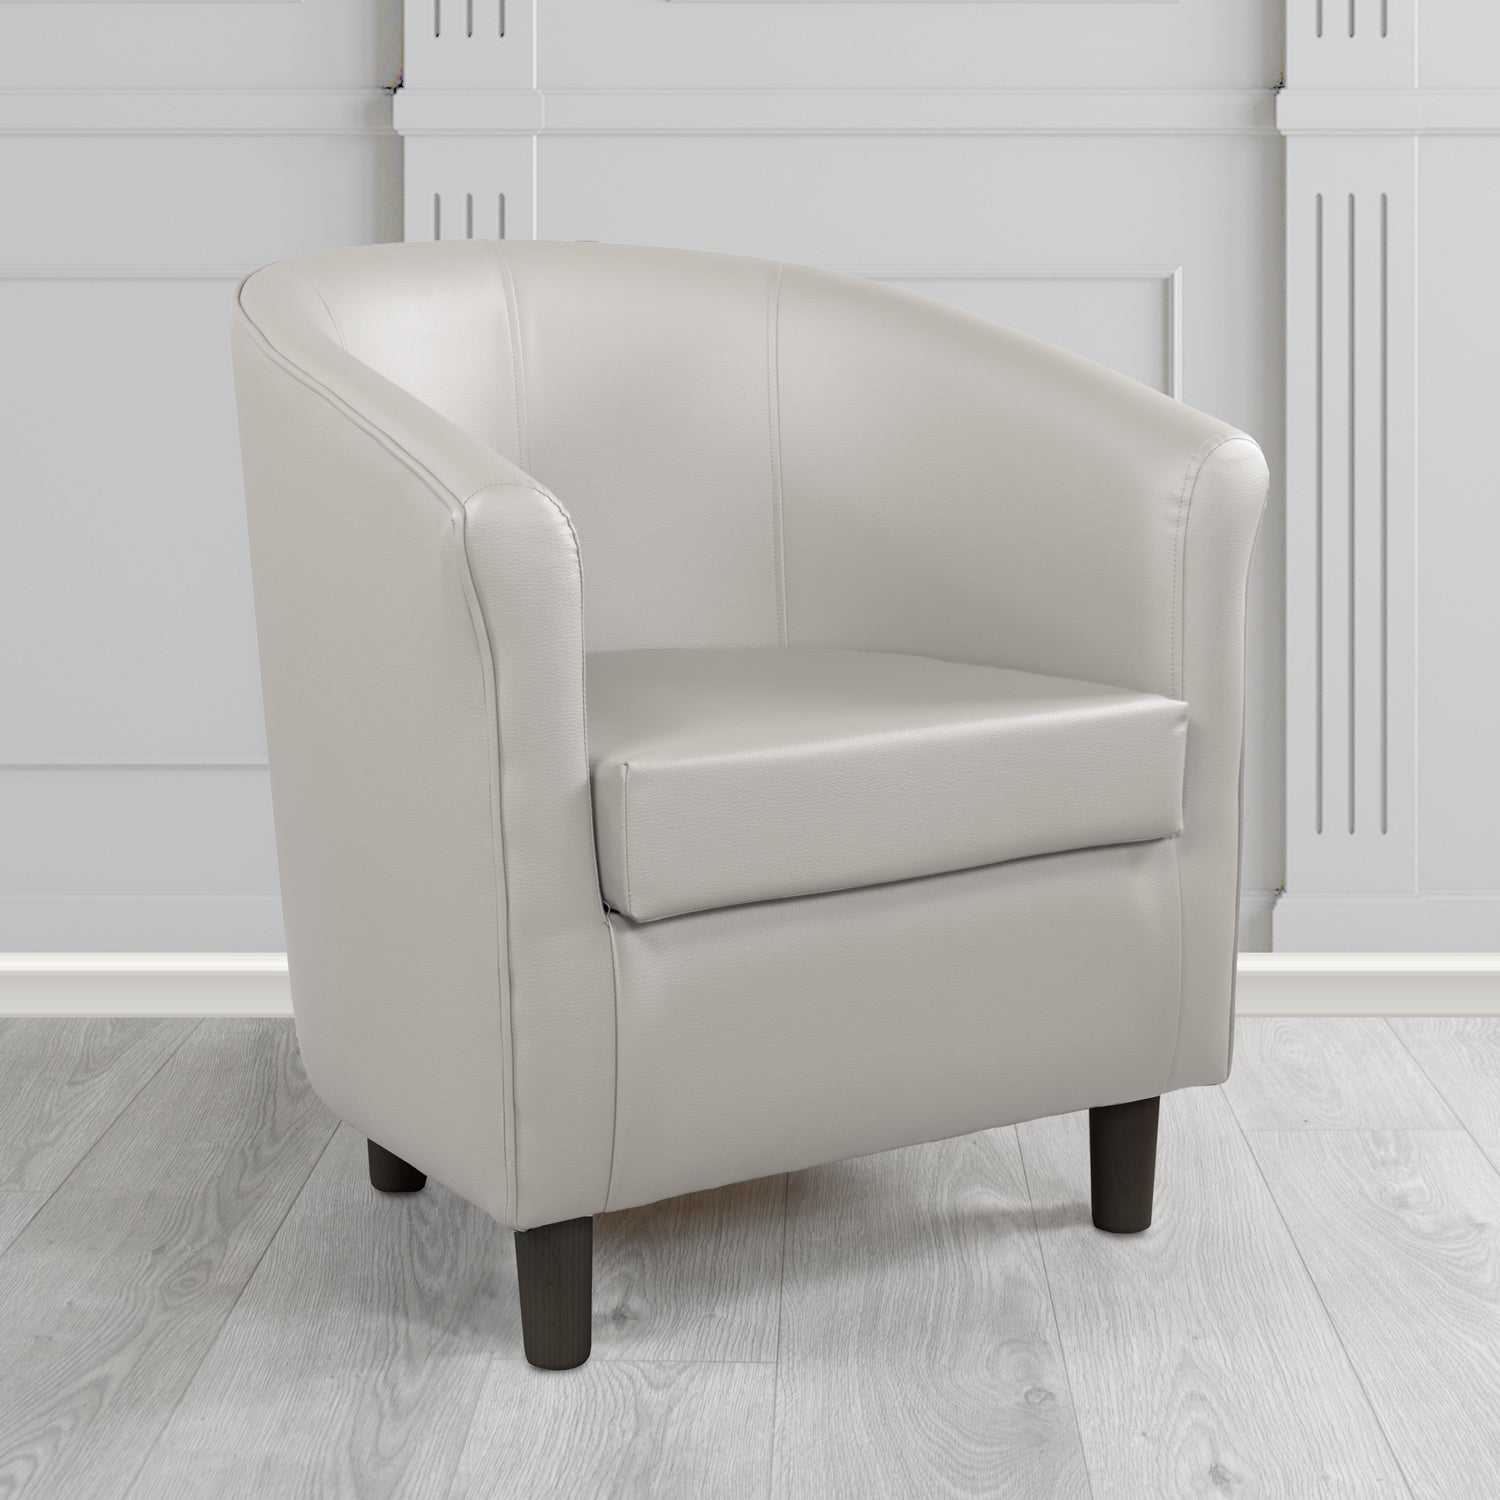 Tuscany Just Colour Putty Antimicrobial Crib 5 Contract Faux Leather Tub Chair